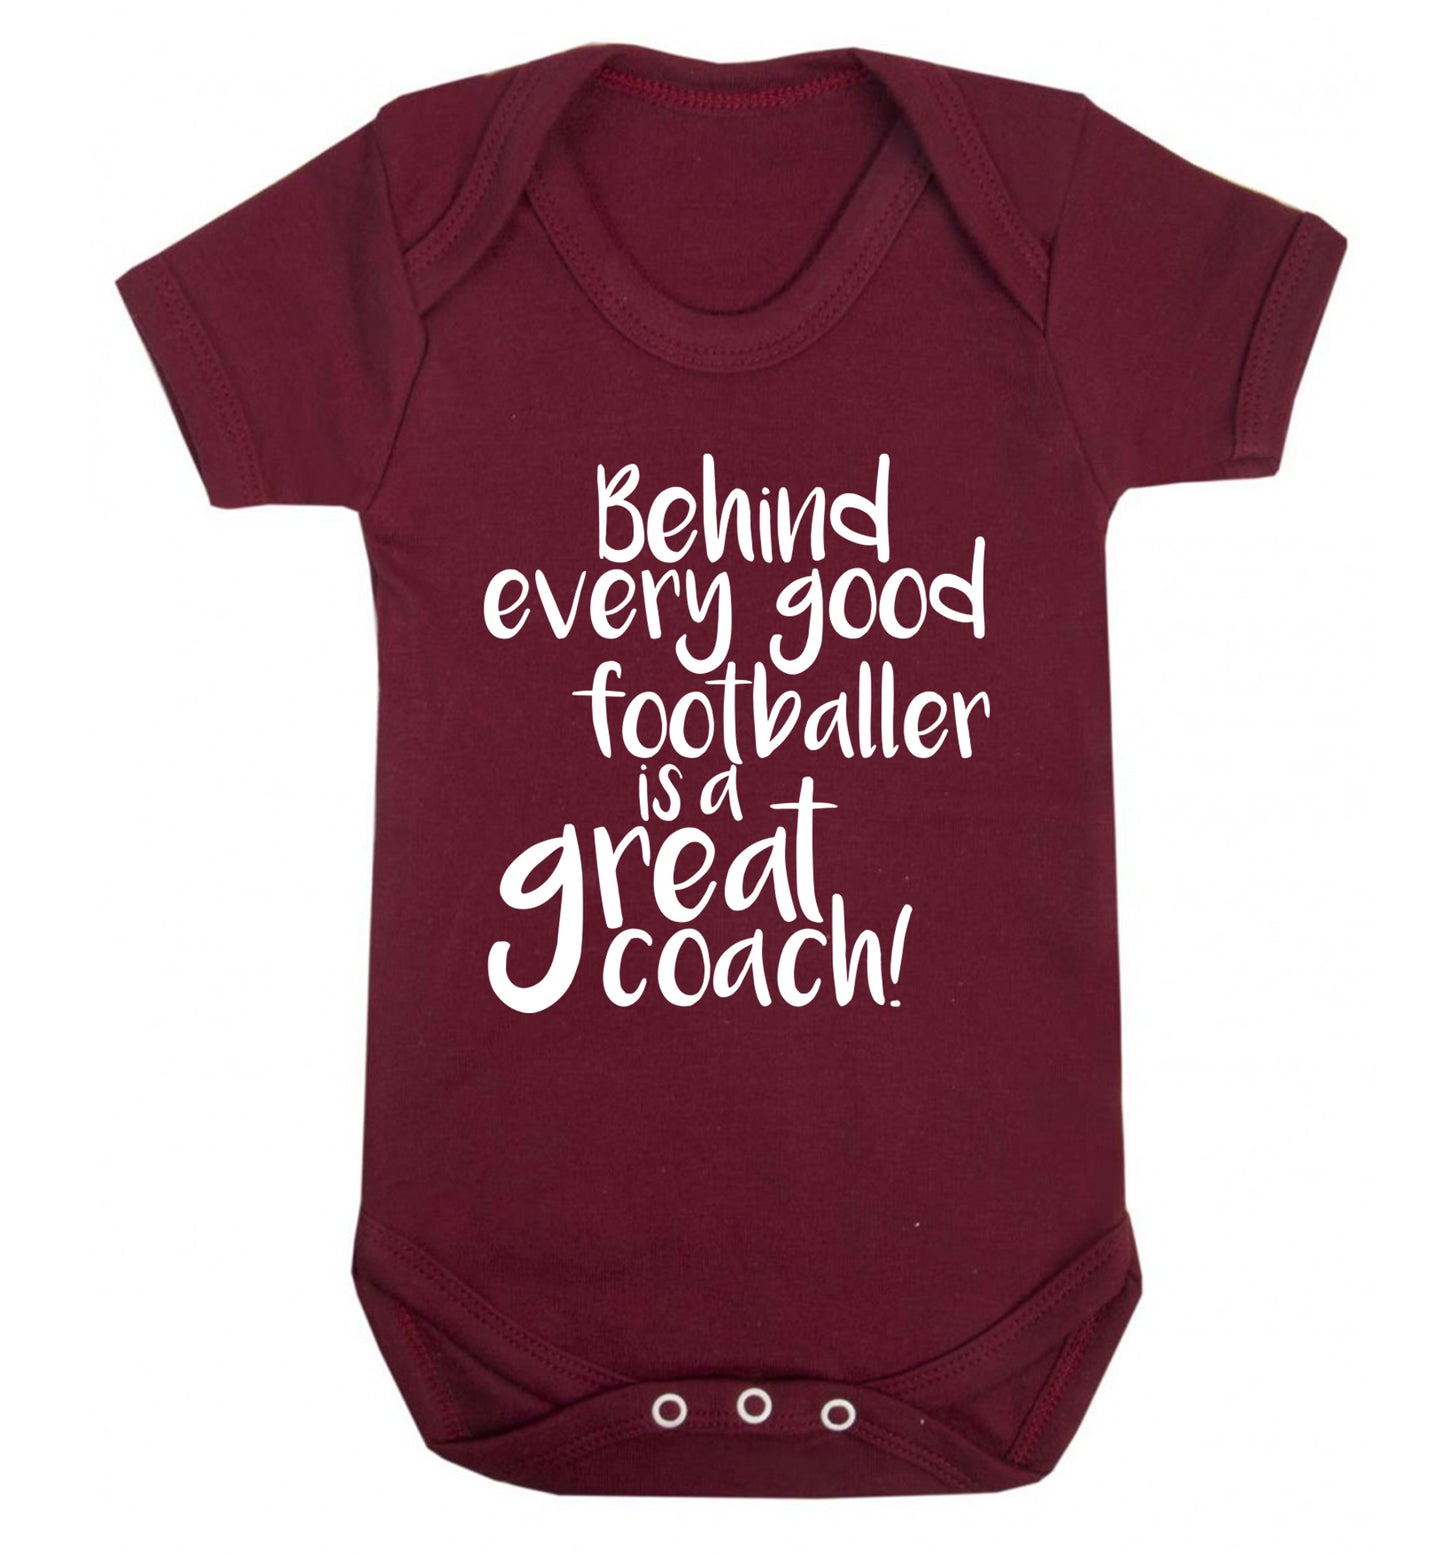 Behind every good footballer is a great coach! Baby Vest maroon 18-24 months